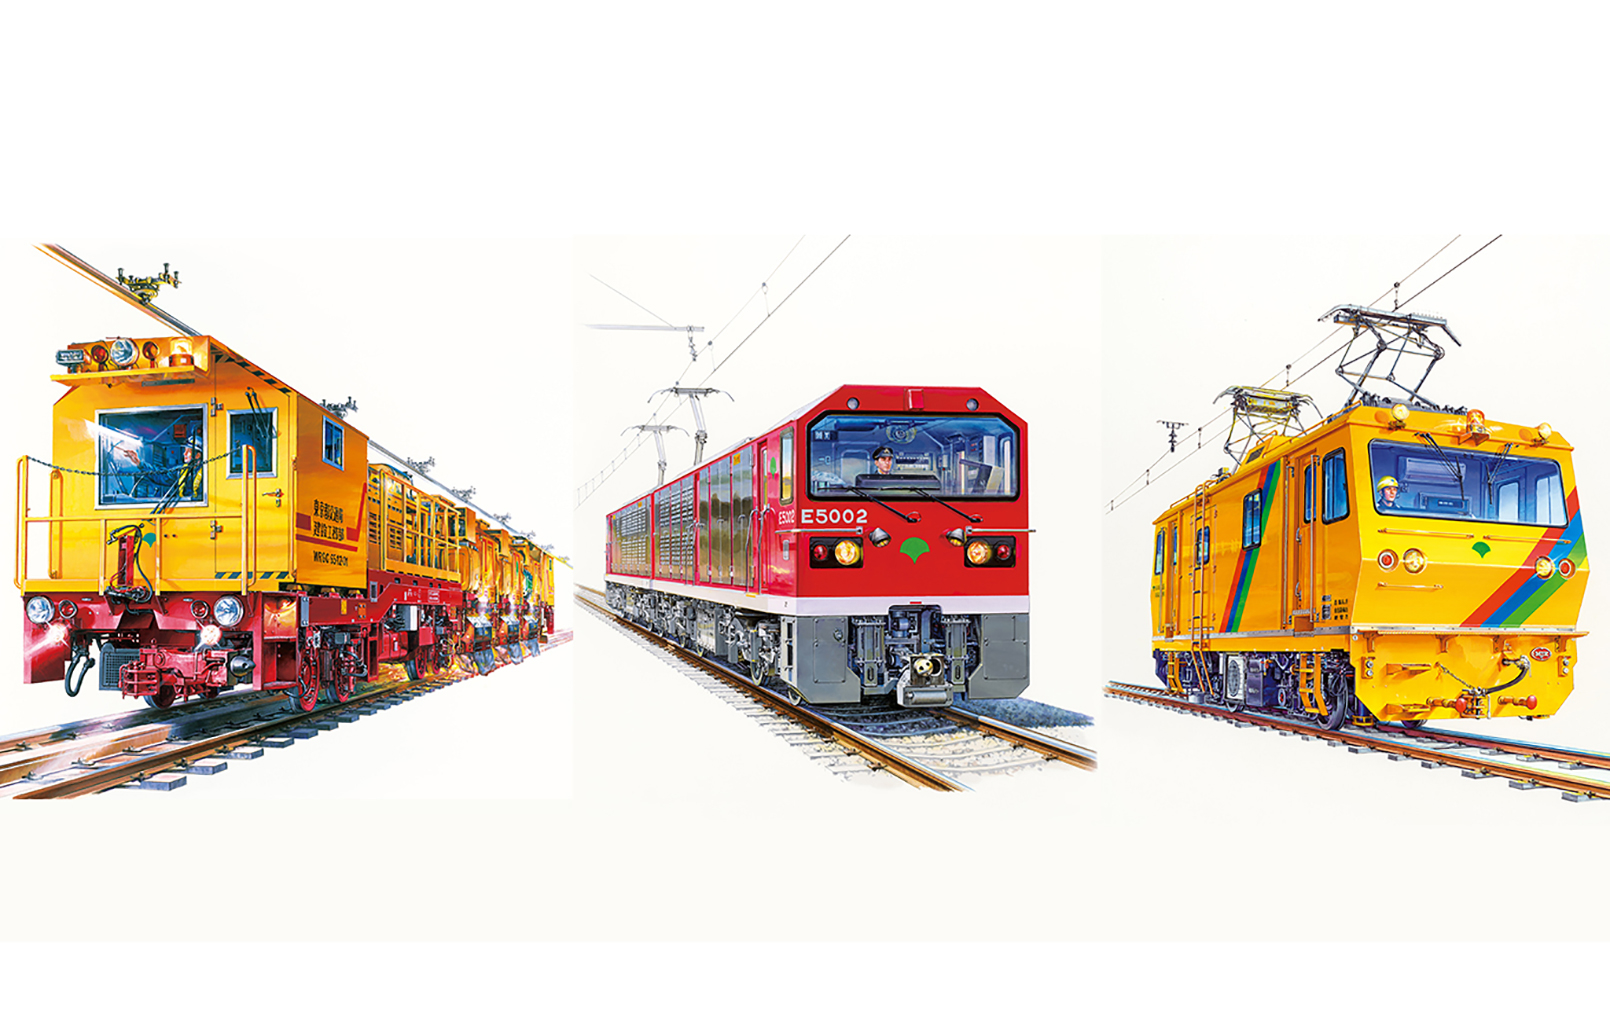 Illustrations of 'Unseen' Japanese Maintenance Trains that Only